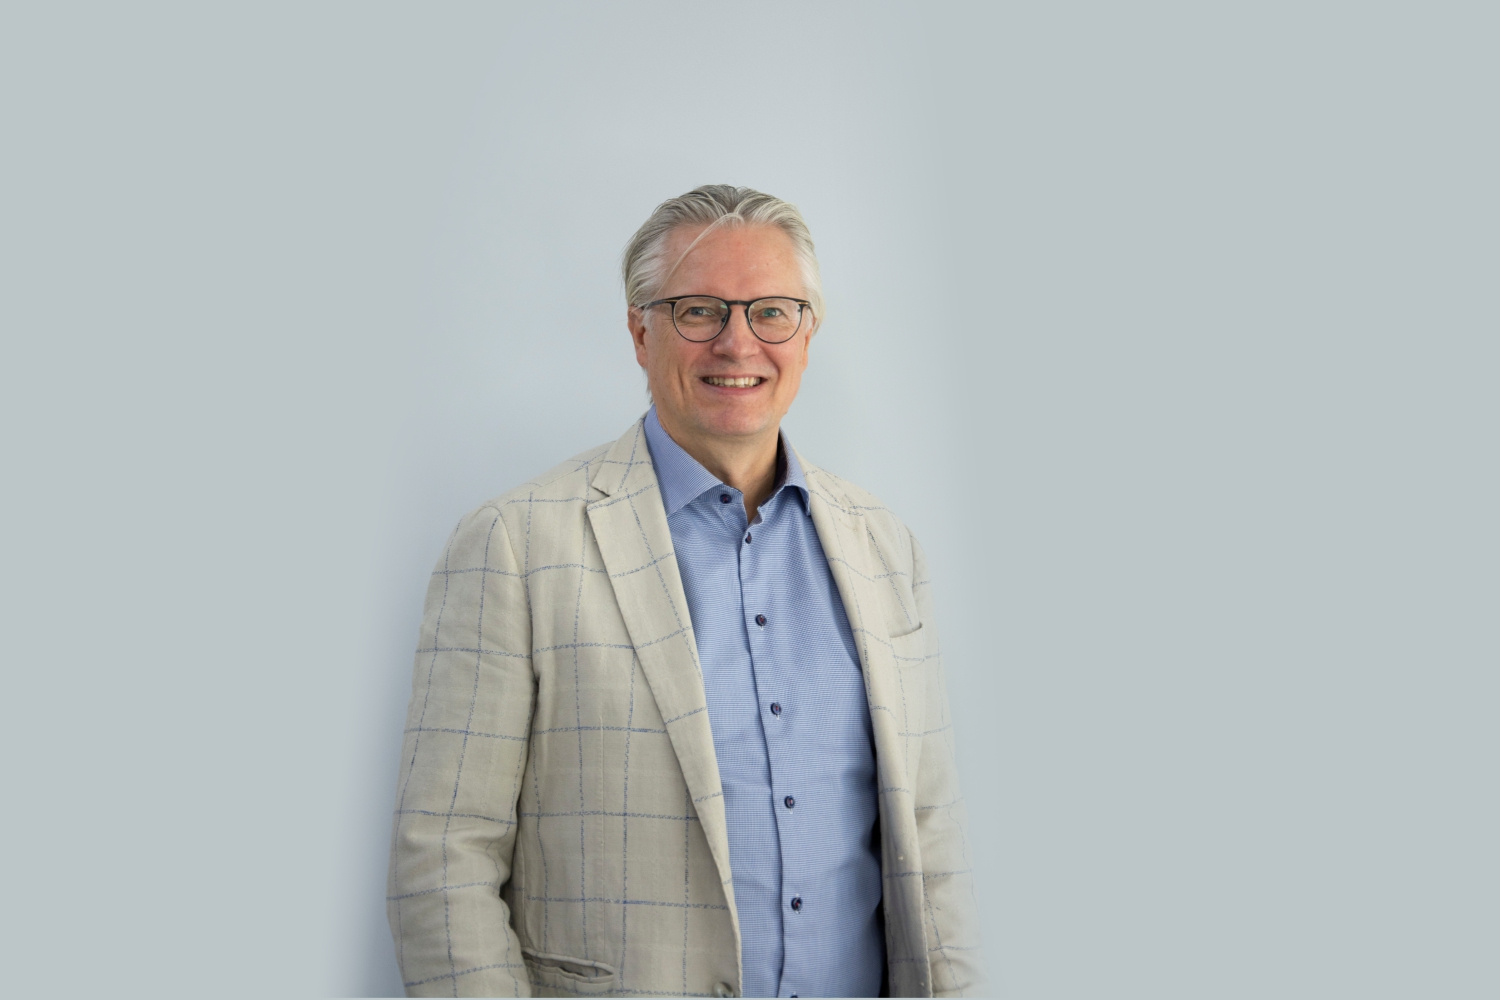 The Board of Syktyvkar Plywood Mill is pleased to announce the appointment of Juha Jalkanen as the new Chief Executive Officer of SPM with effect from 6th of September 2021